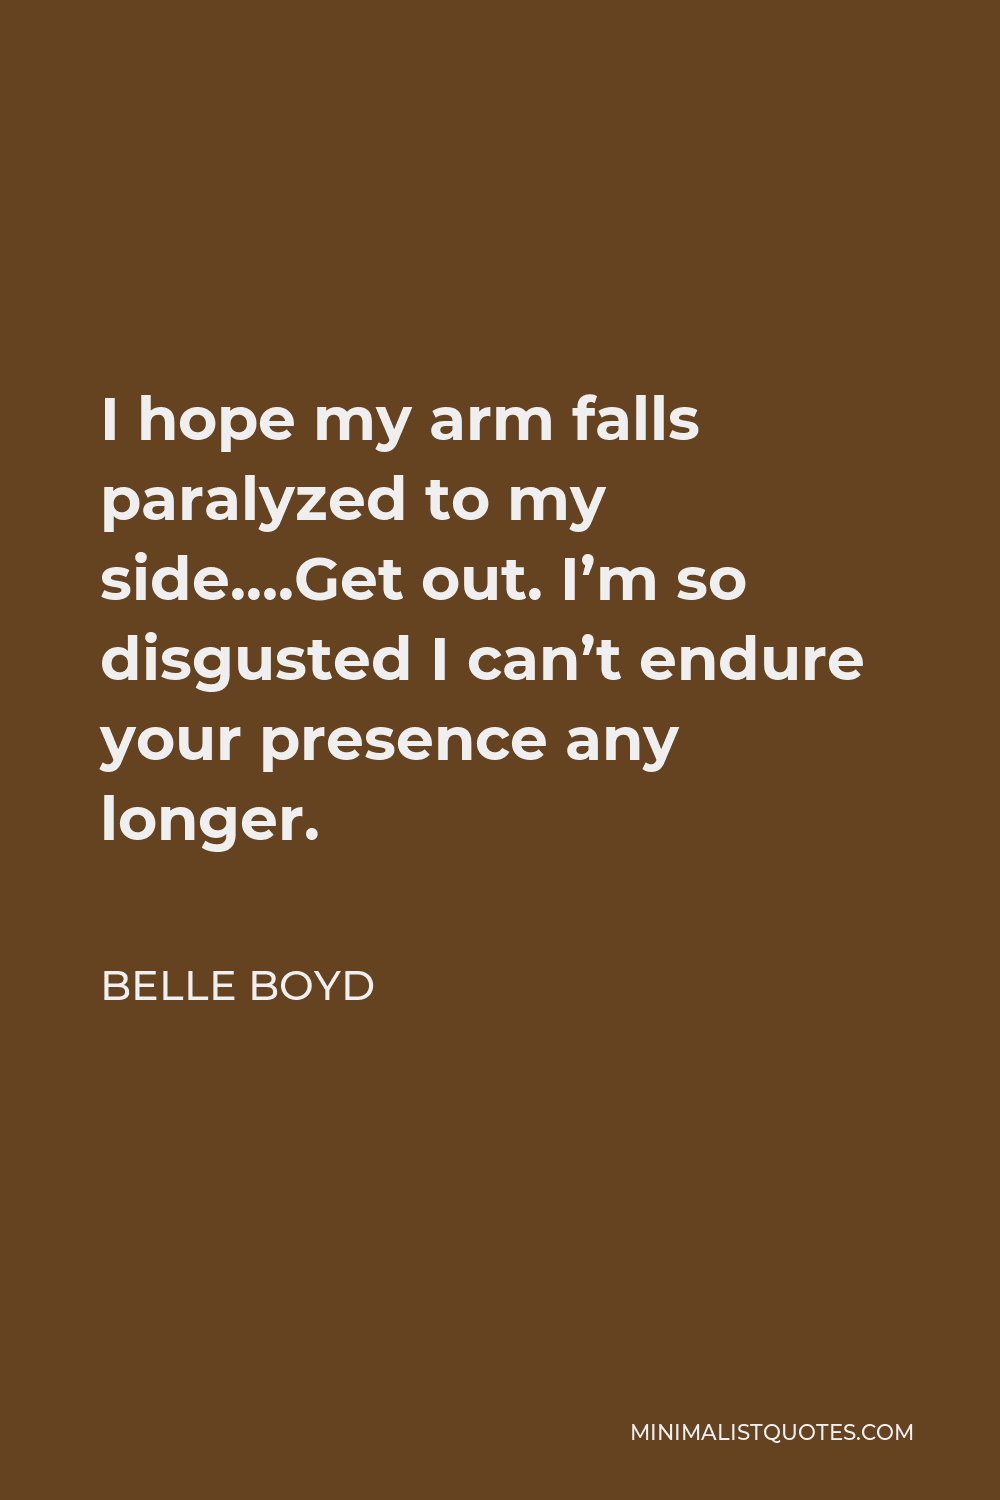 Belle Boyd Quote - I hope my arm falls paralyzed to my side….Get out. I’m so disgusted I can’t endure your presence any longer.